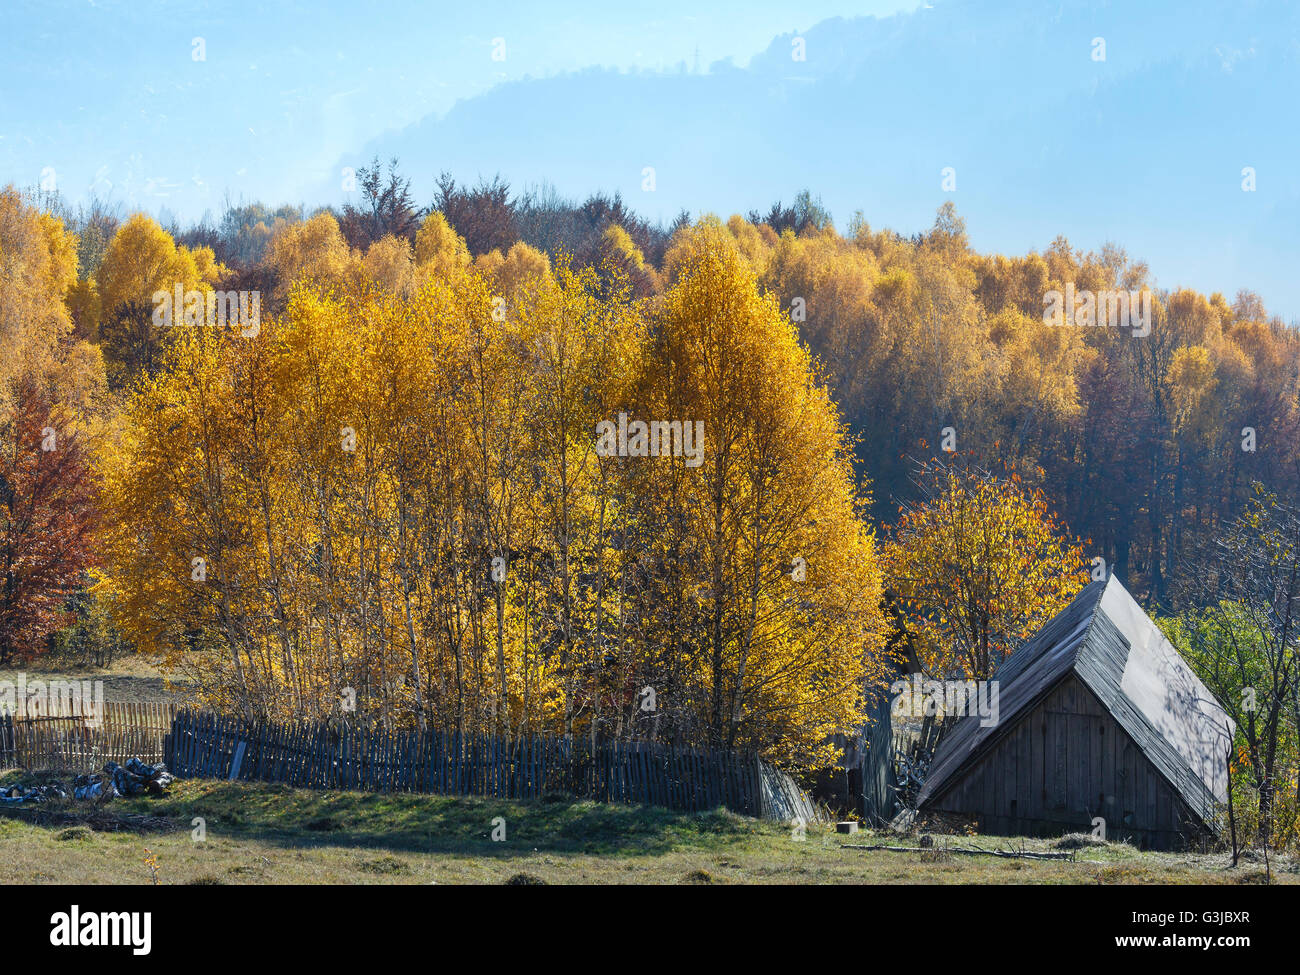 Autumn misty mountain slope with yellow birch trees and roof of wooden house. Stock Photo